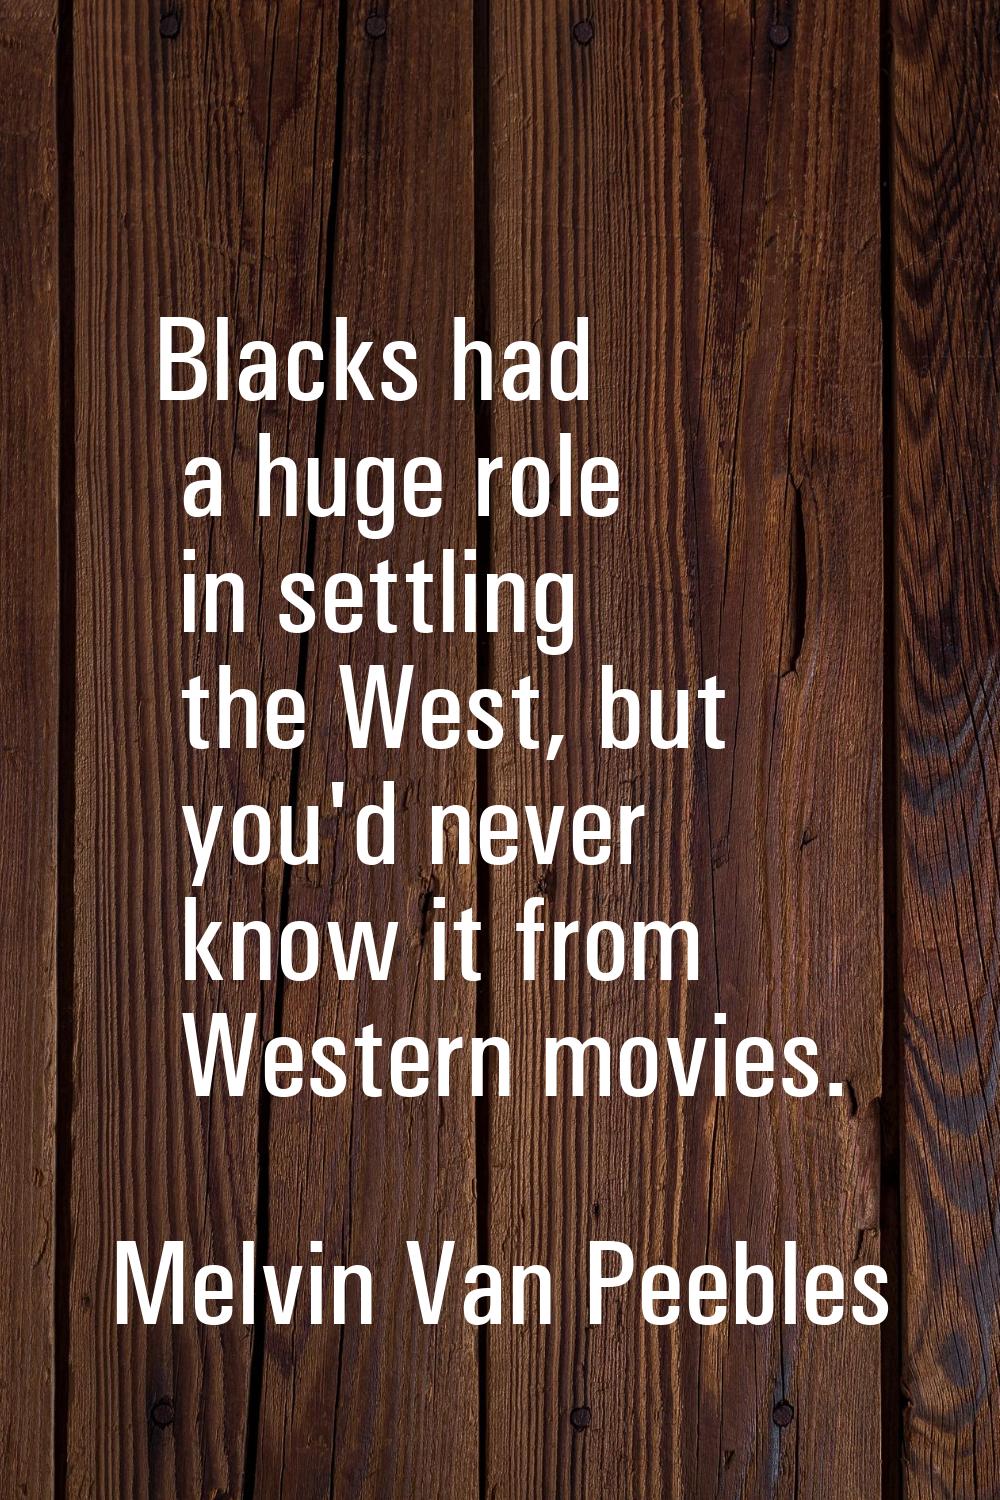 Blacks had a huge role in settling the West, but you'd never know it from Western movies.